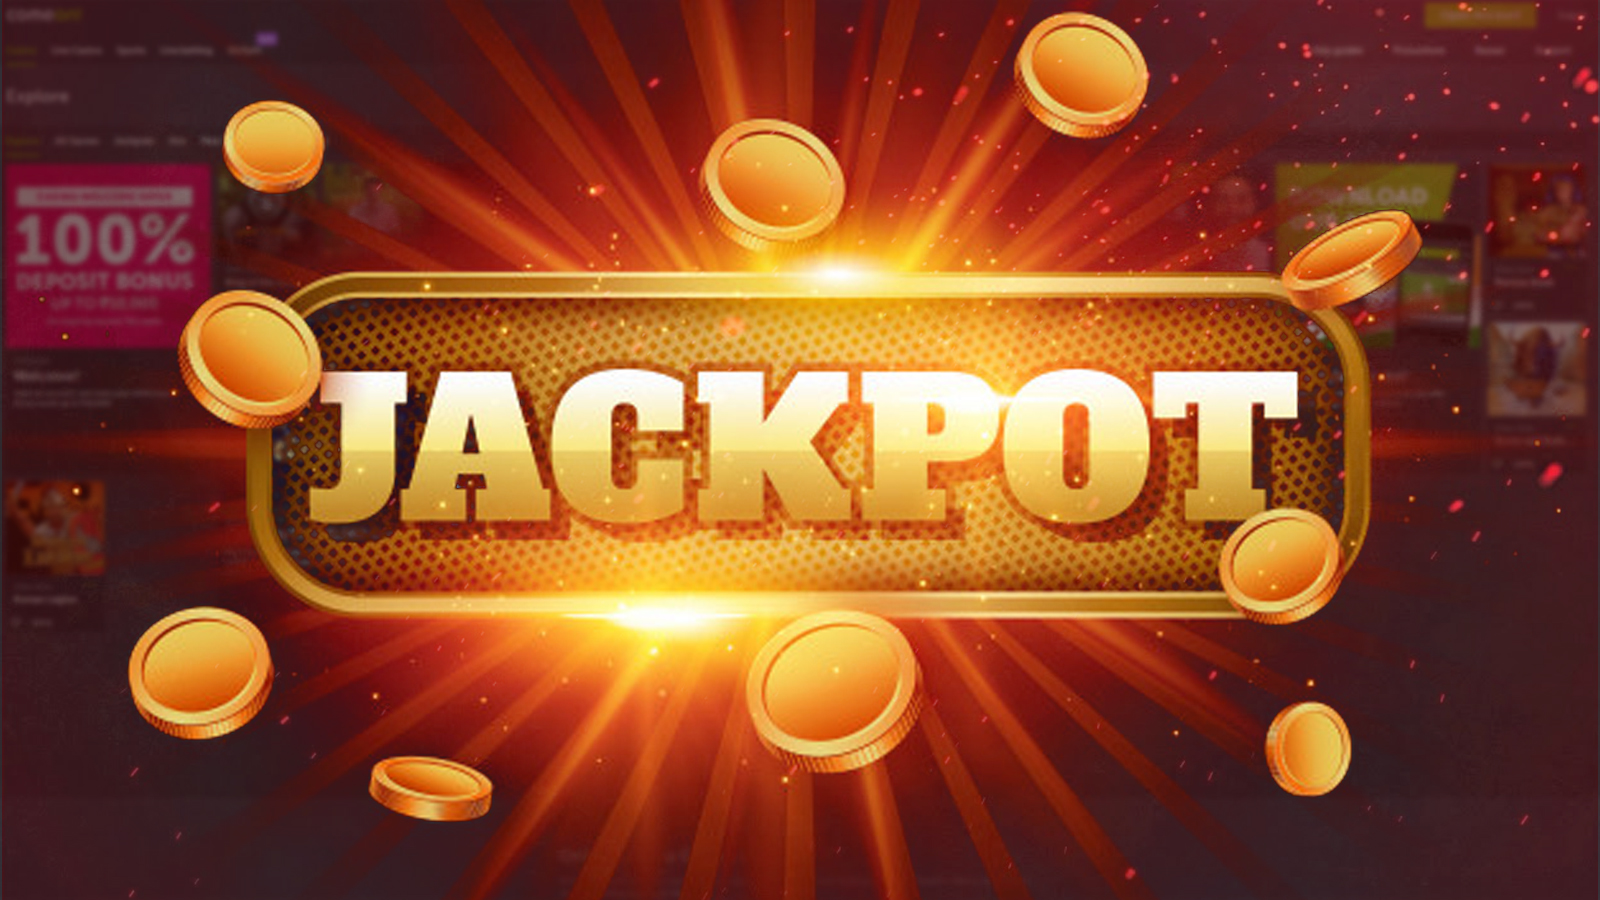 Play jackpot games and try to win a big prize at Comeon Casino.